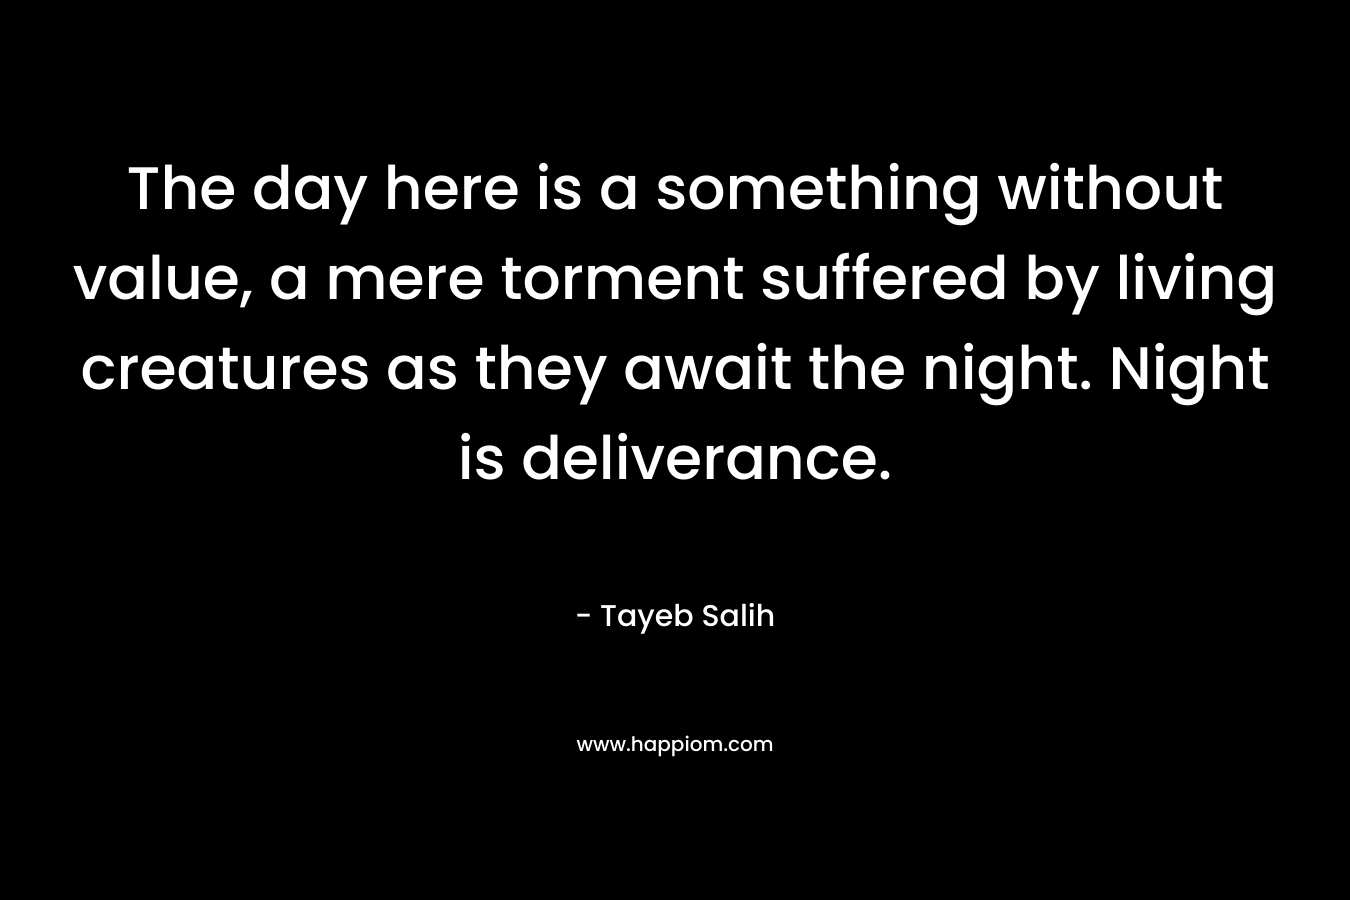 The day here is a something without value, a mere torment suffered by living creatures as they await the night. Night is deliverance. – Tayeb Salih